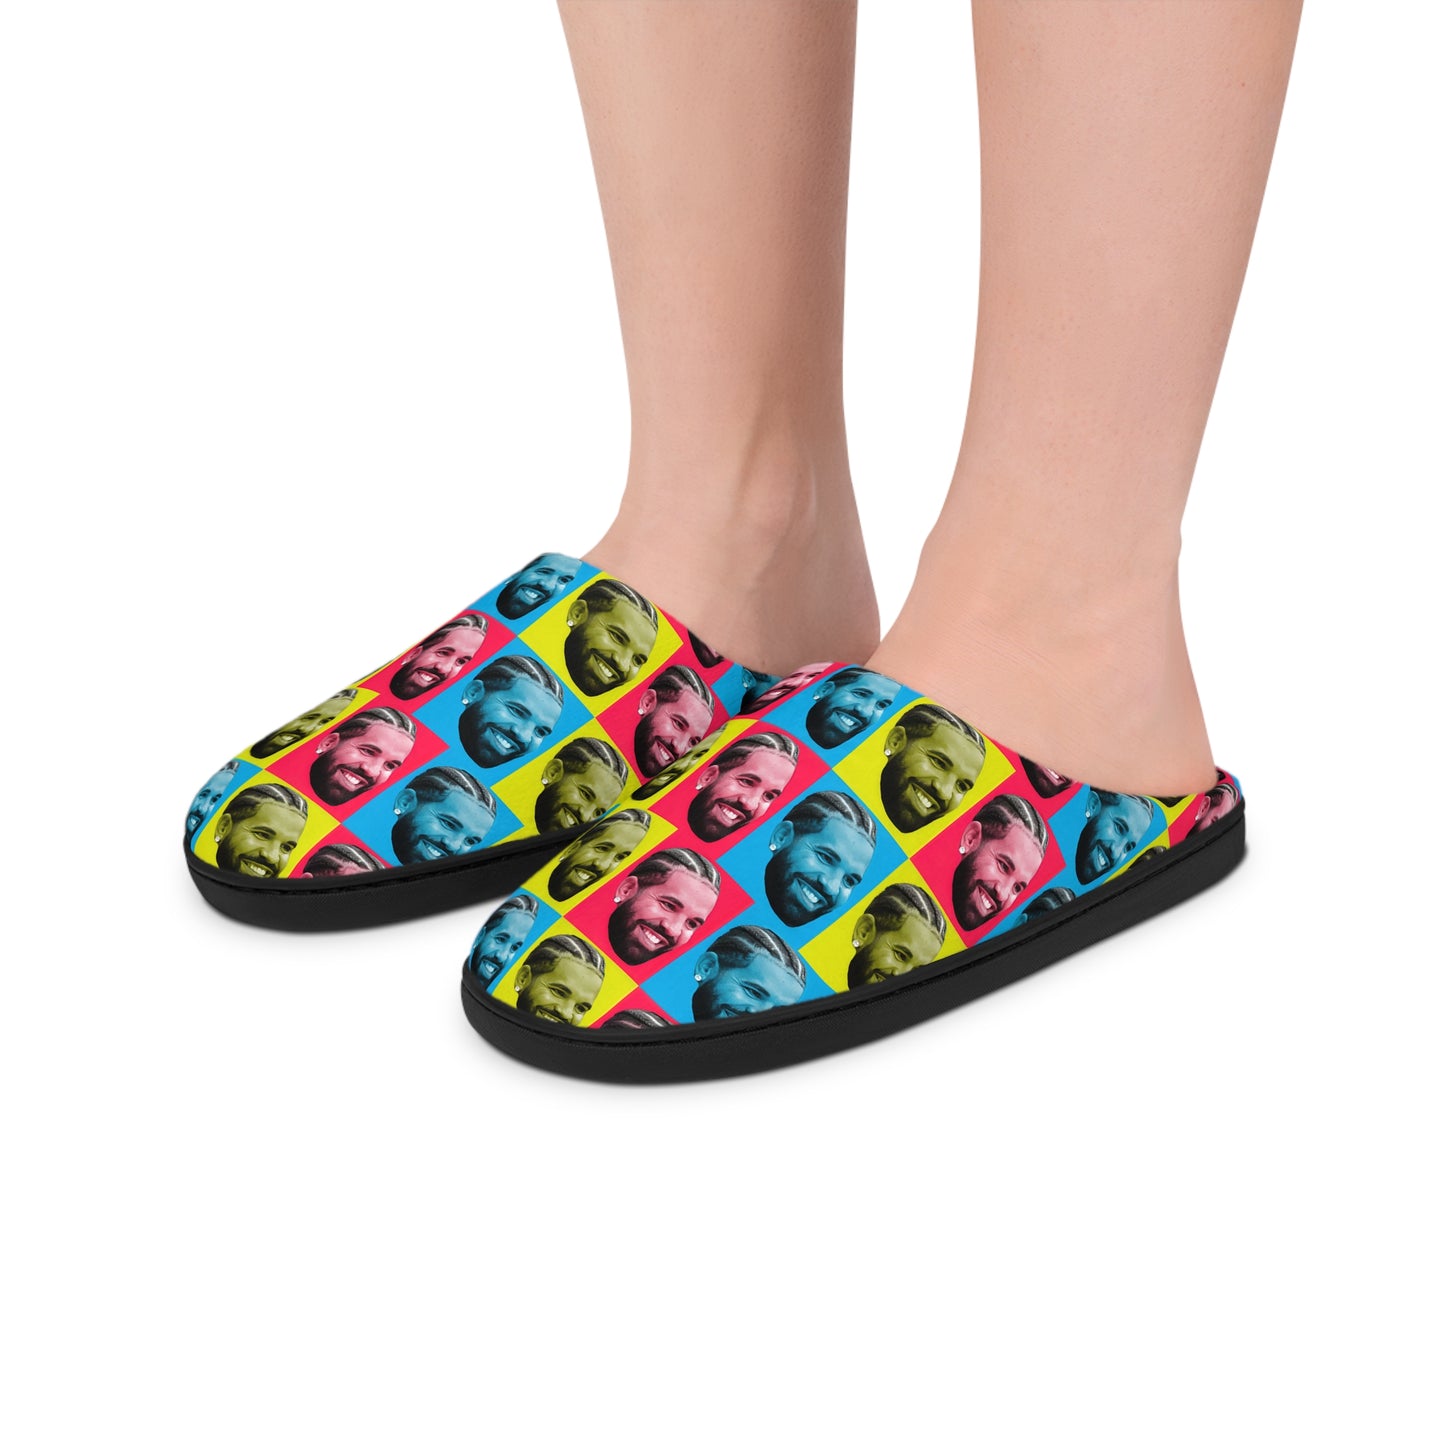 Drake Colored Checker Faces Women's Indoor Slippers